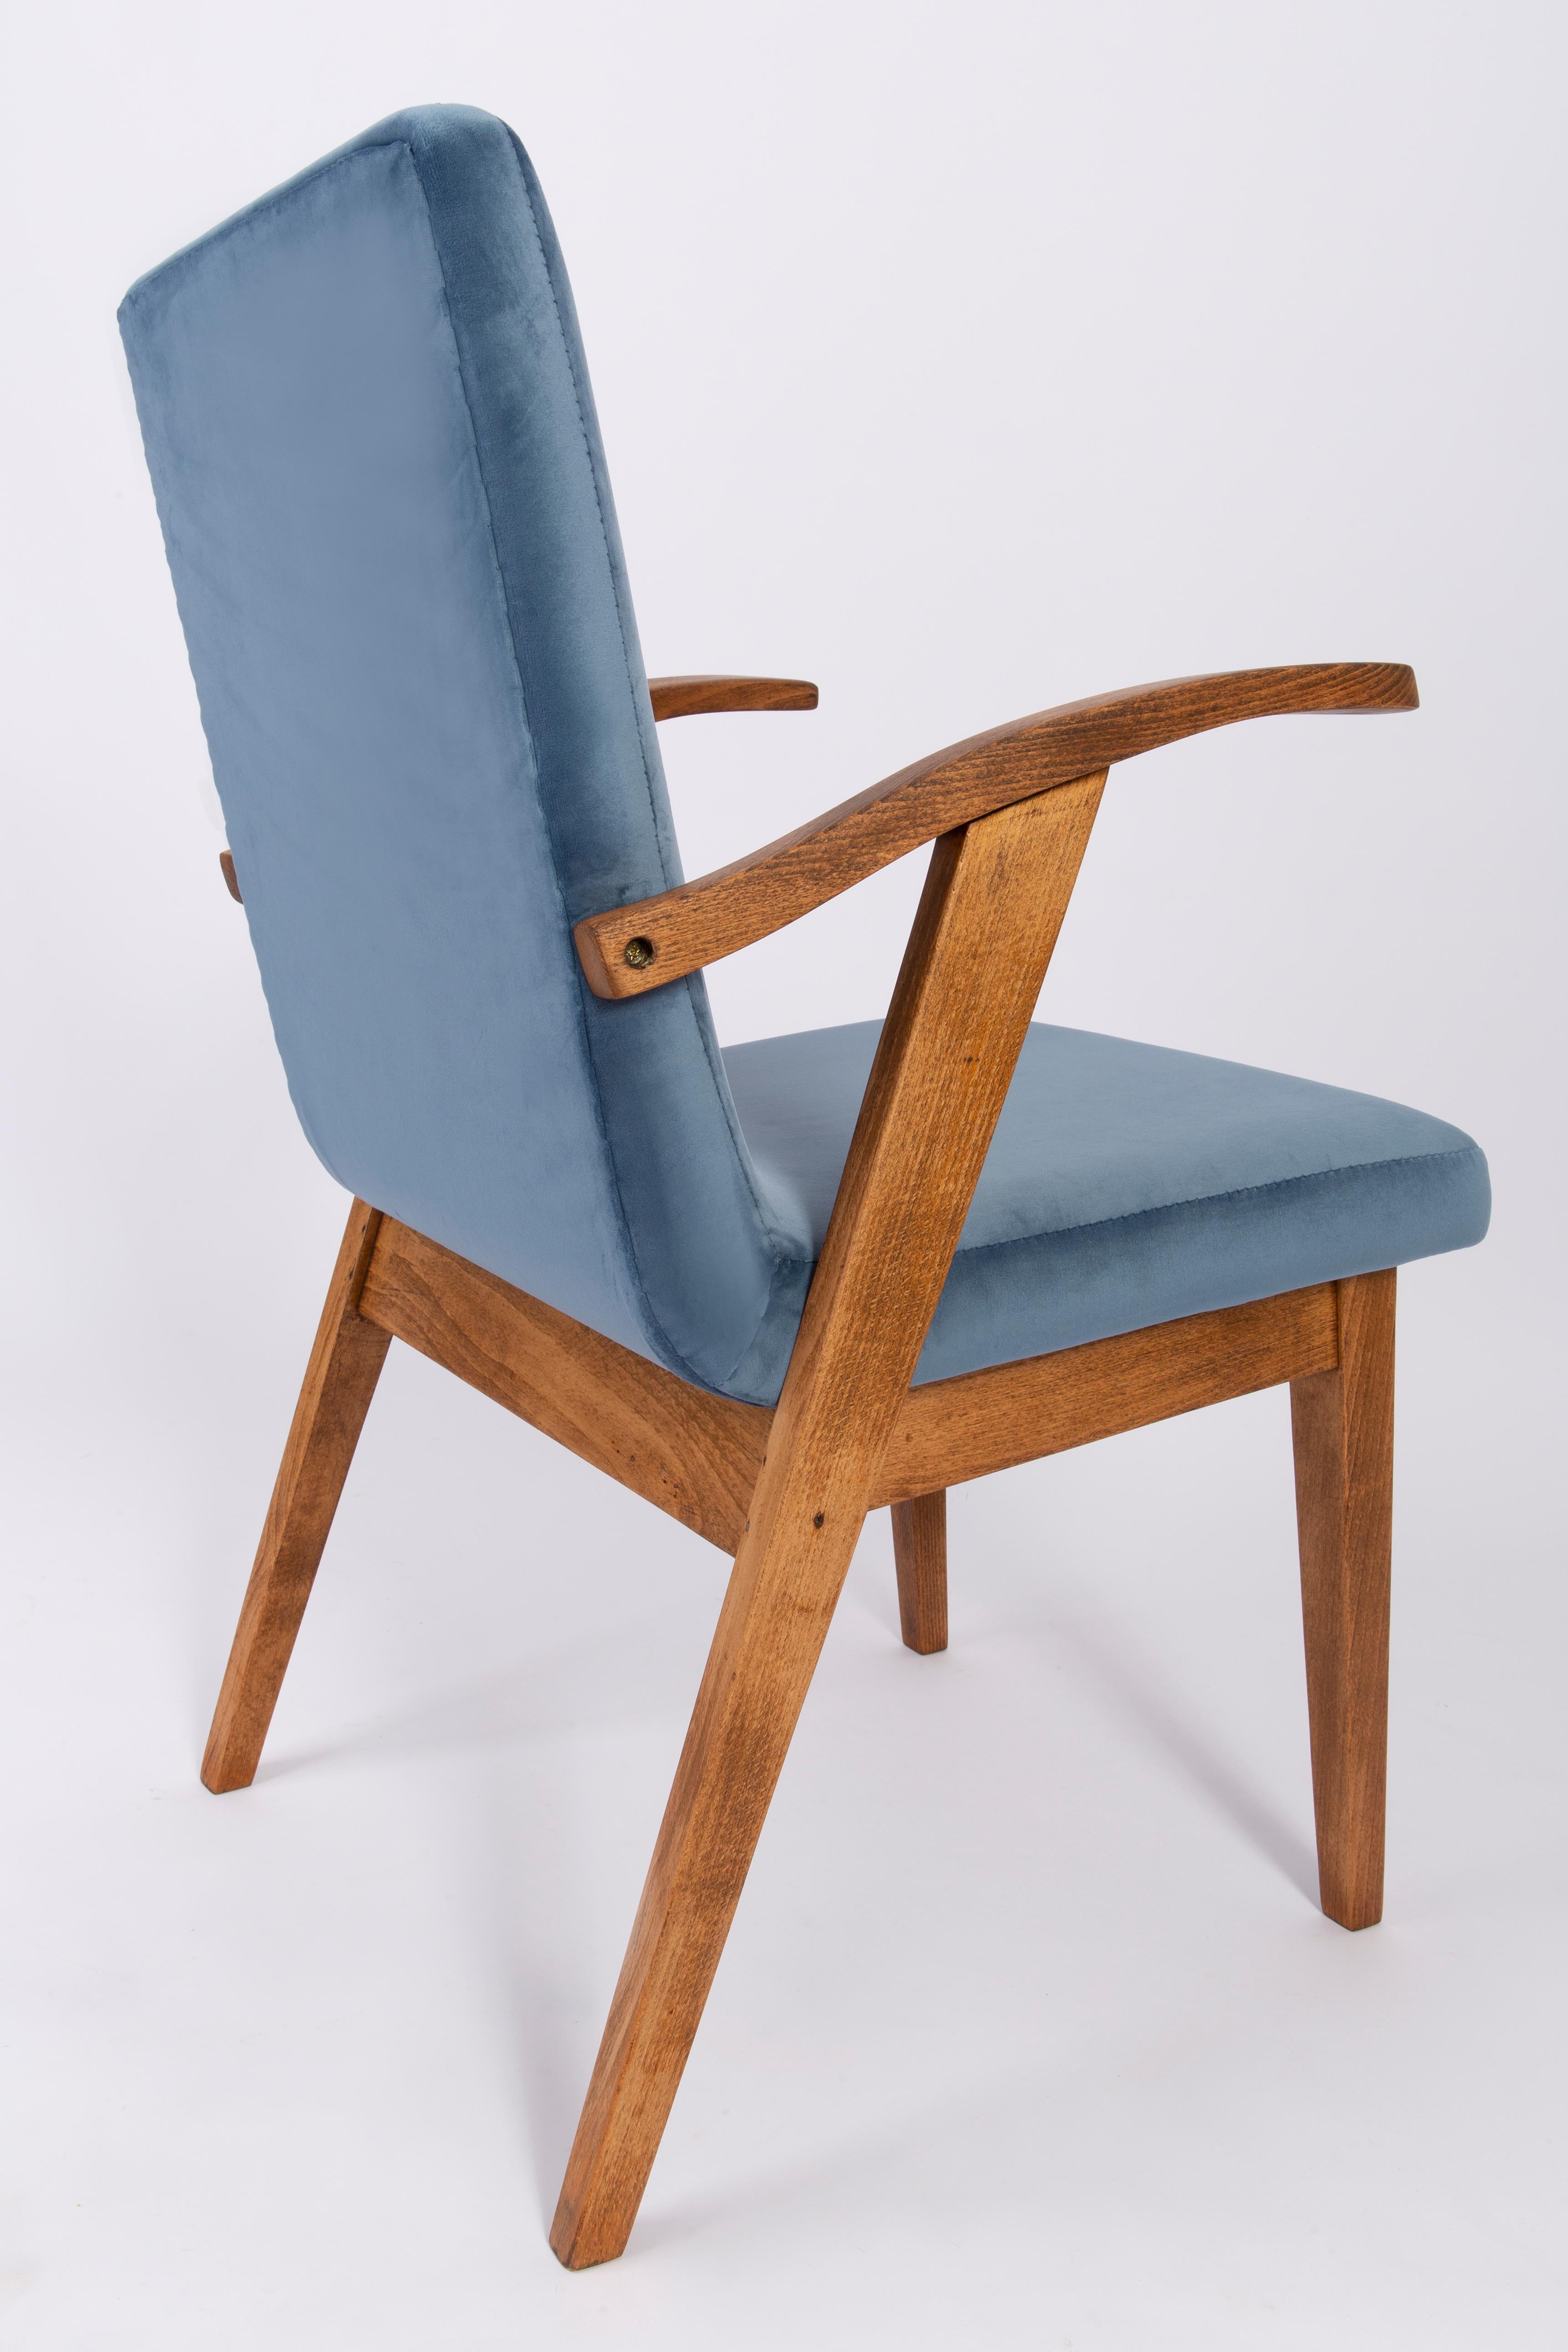 Set of Eight 20th Century Vintage Blue Chairs by Mieczyslaw Puchala, 1960s For Sale 3